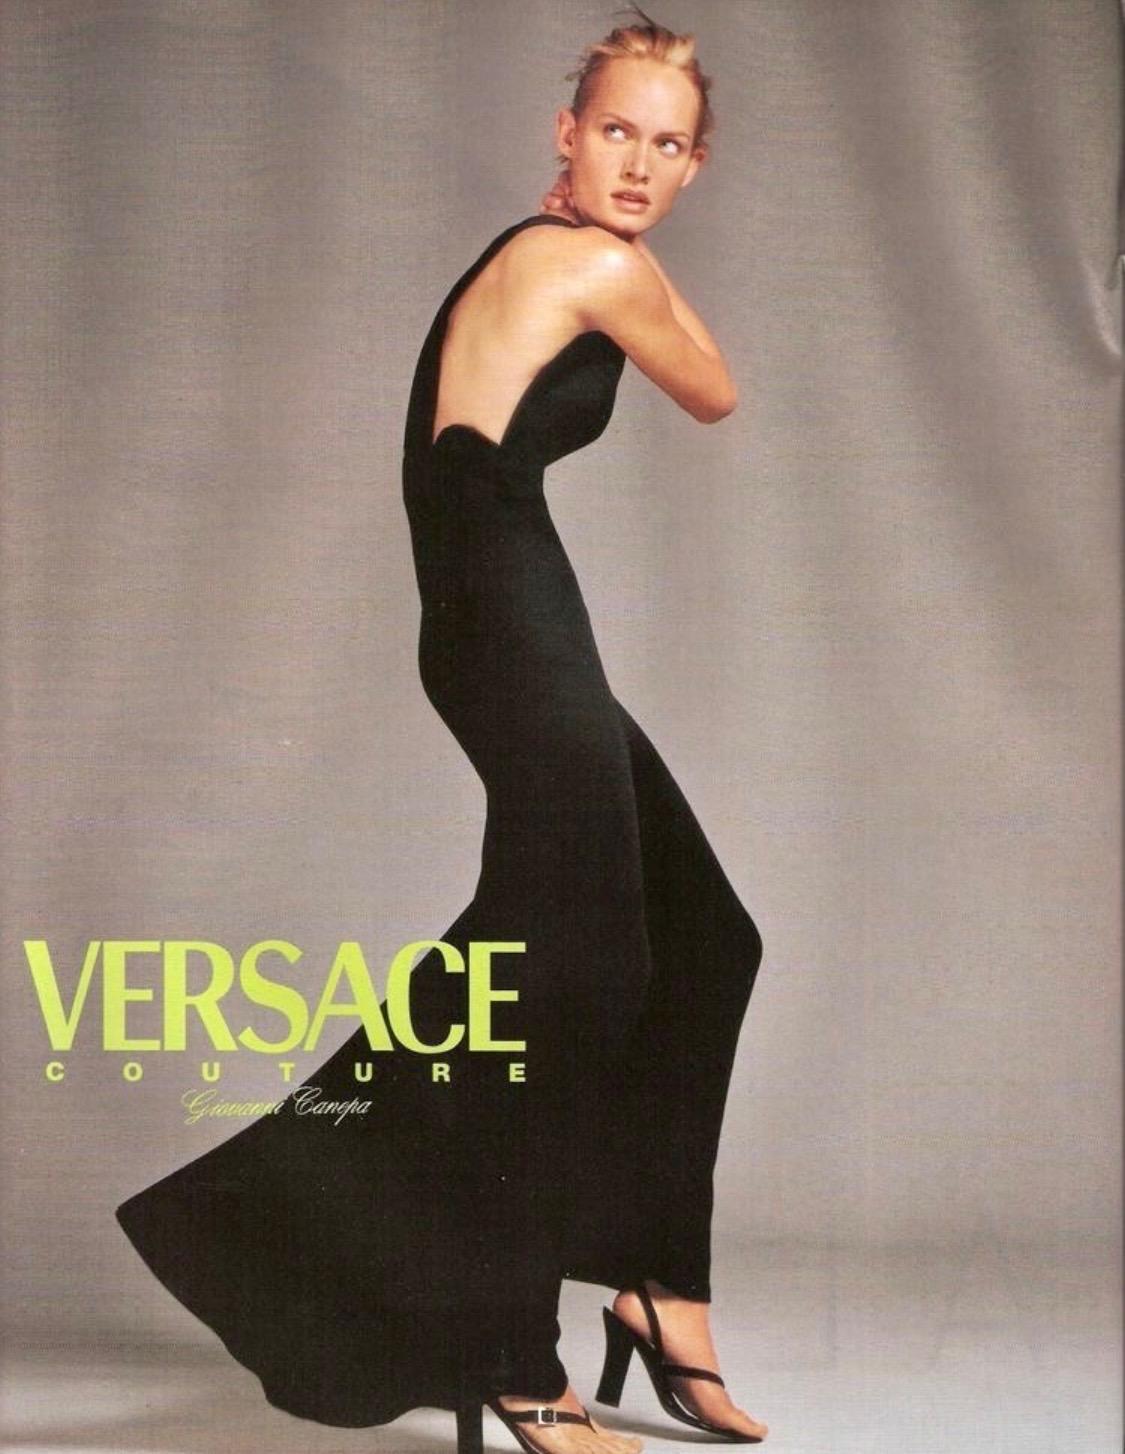 Presenting a black scallop-edged full-length gown designed by Gianni Versace for his Spring/Summer 1996 collection. Princess Diana famously wore a purple version of this gown to a fundraising gala dinner in Chicago on June 5th, 1996. A version of